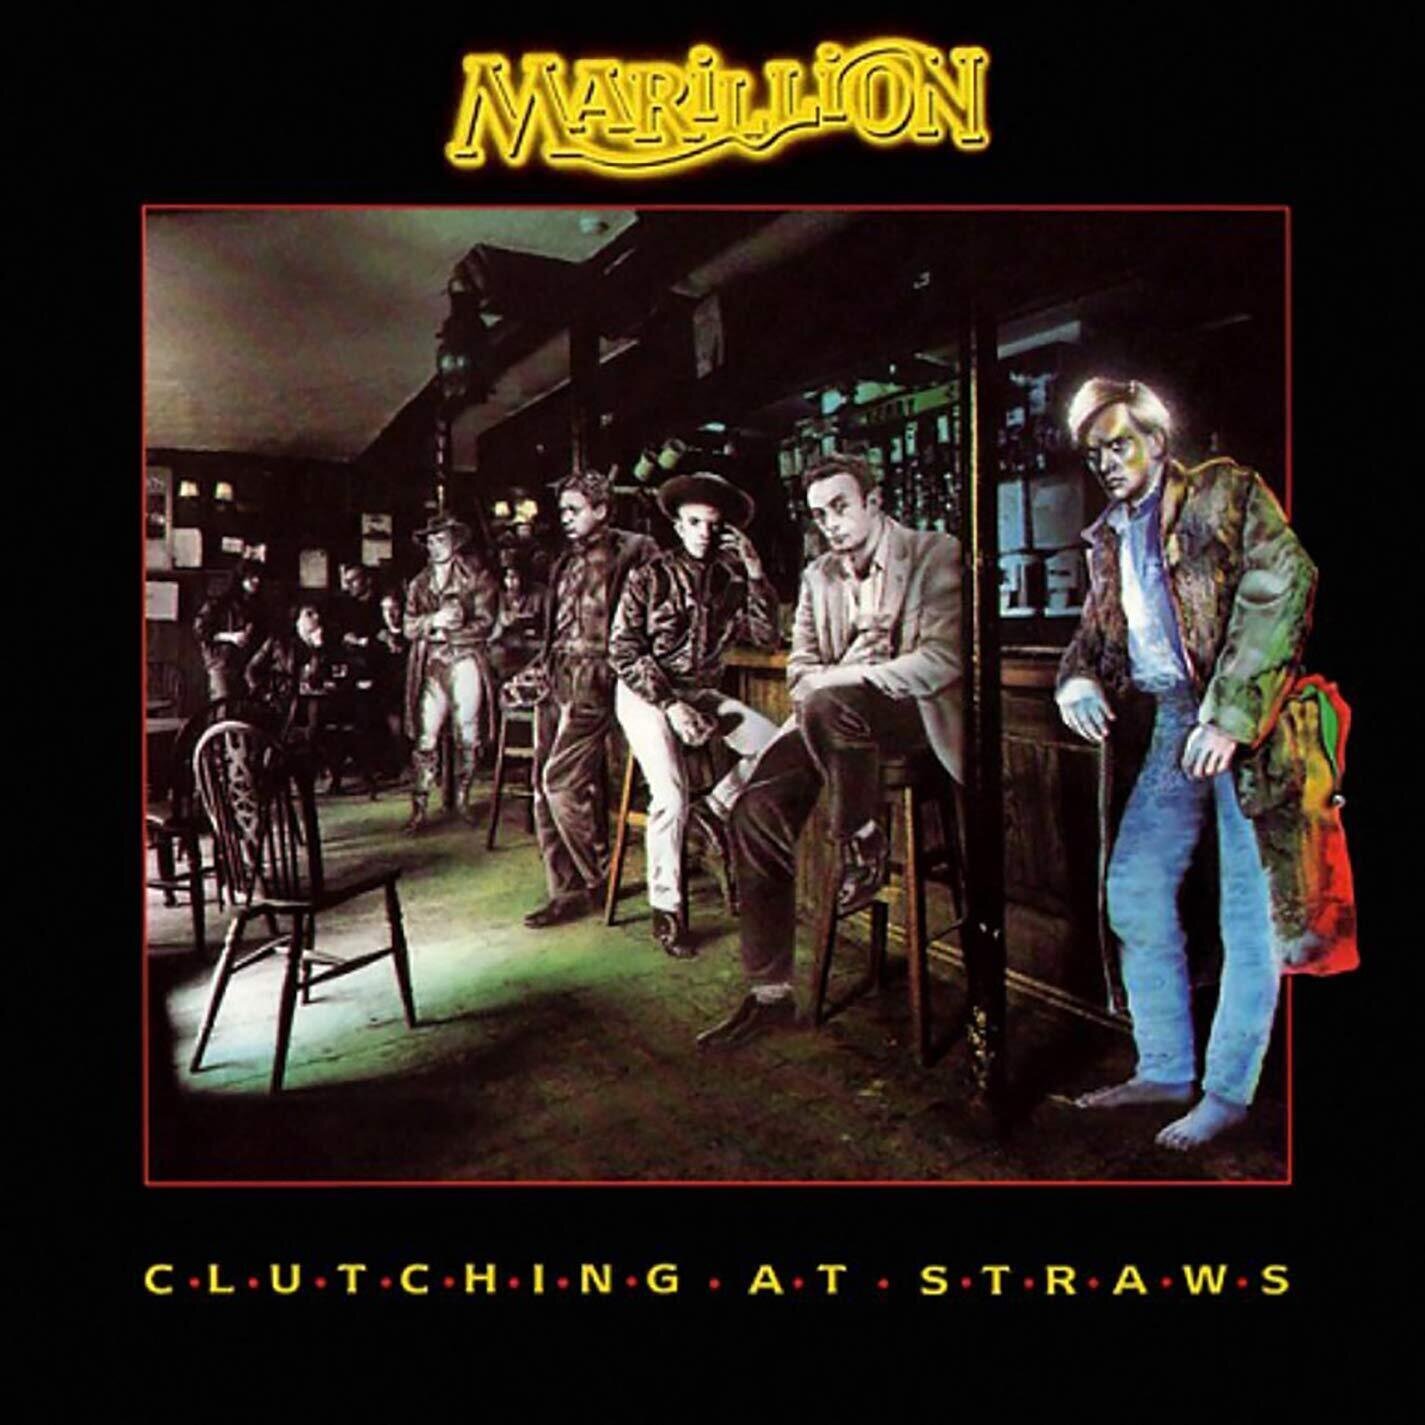 LP Marillion - Clutching At Straws (Deluxe Edition) (5 LP)